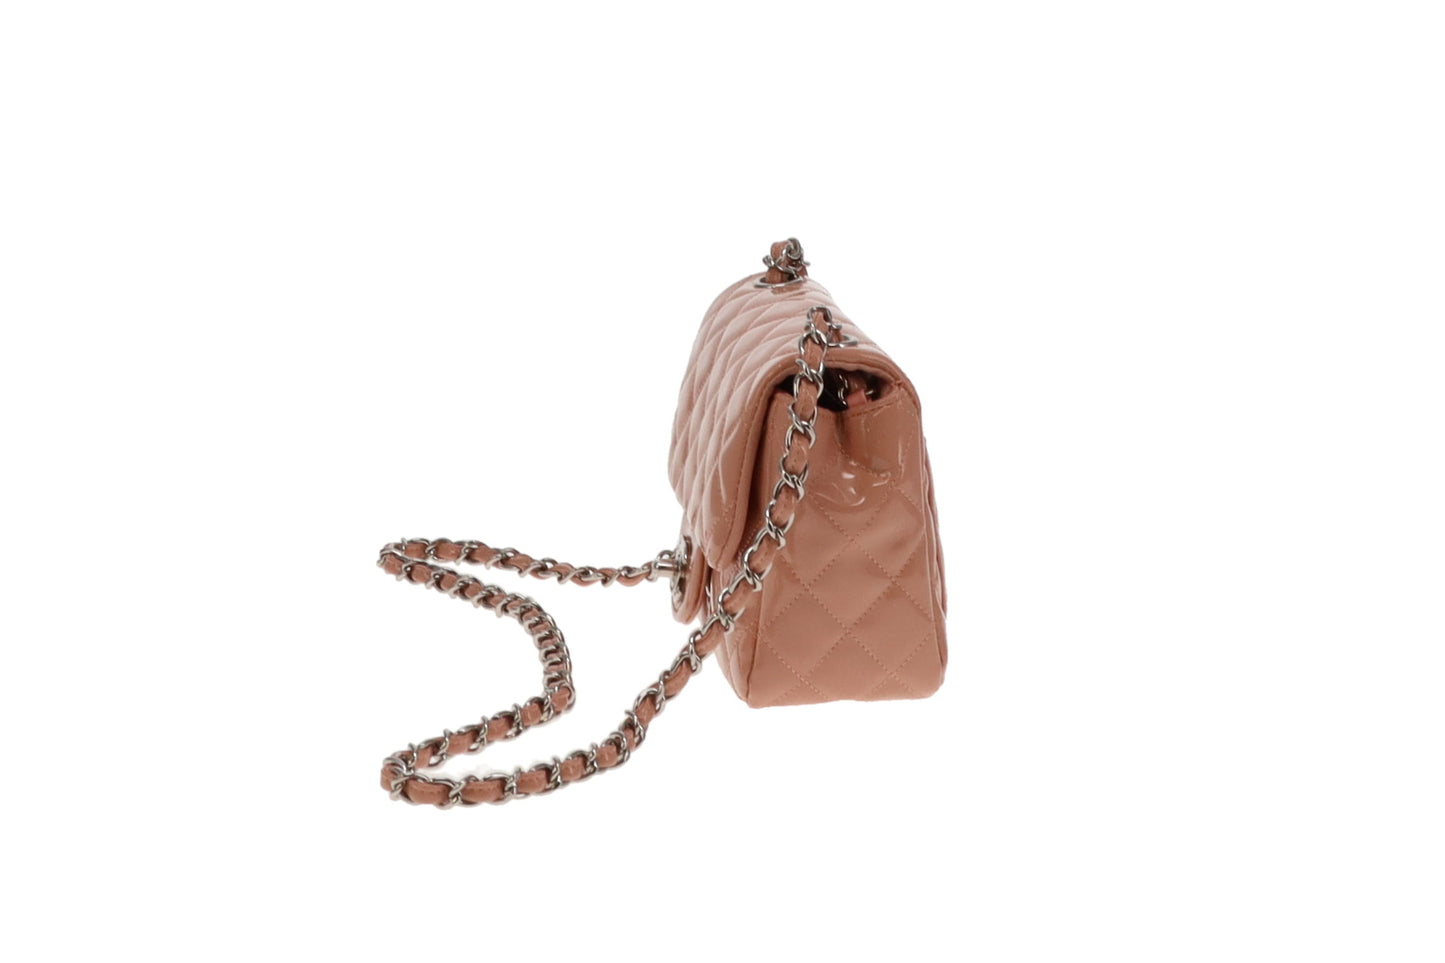 Chanel Blush Patent Leather and SHW Mini Square Flap Bag 2012/13